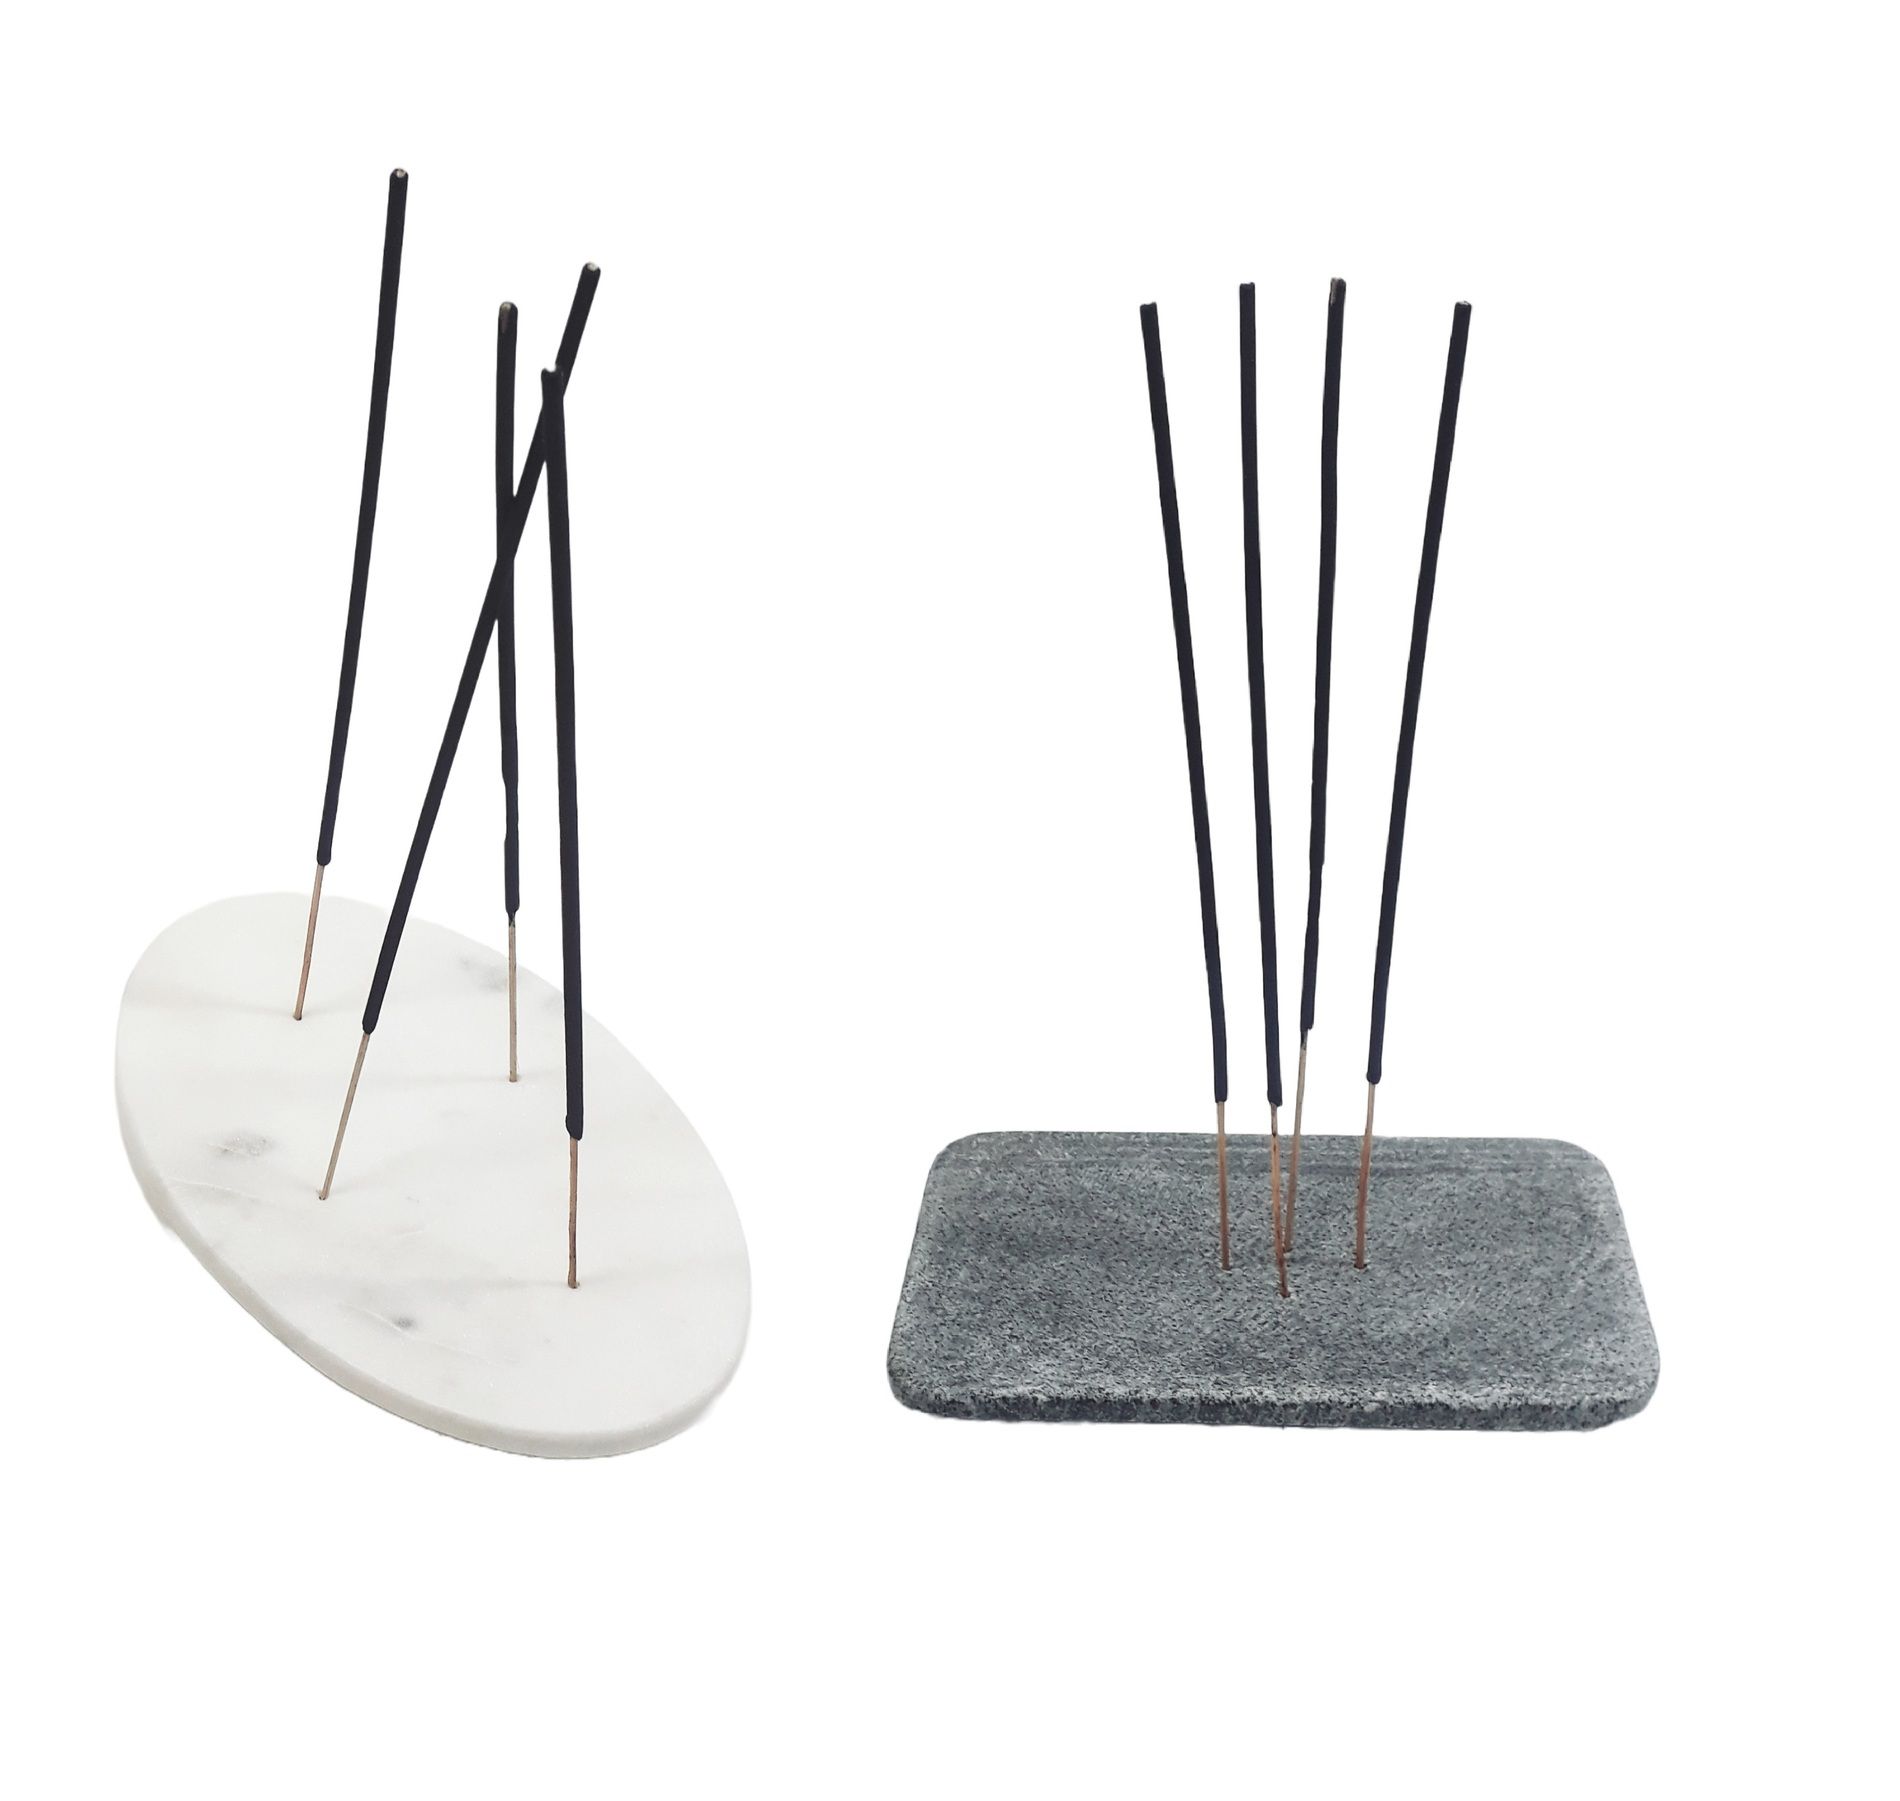     			KRAFT CLOUDS - Incense Stick Holder Natural 2 Pieces ( Pack of 2 )